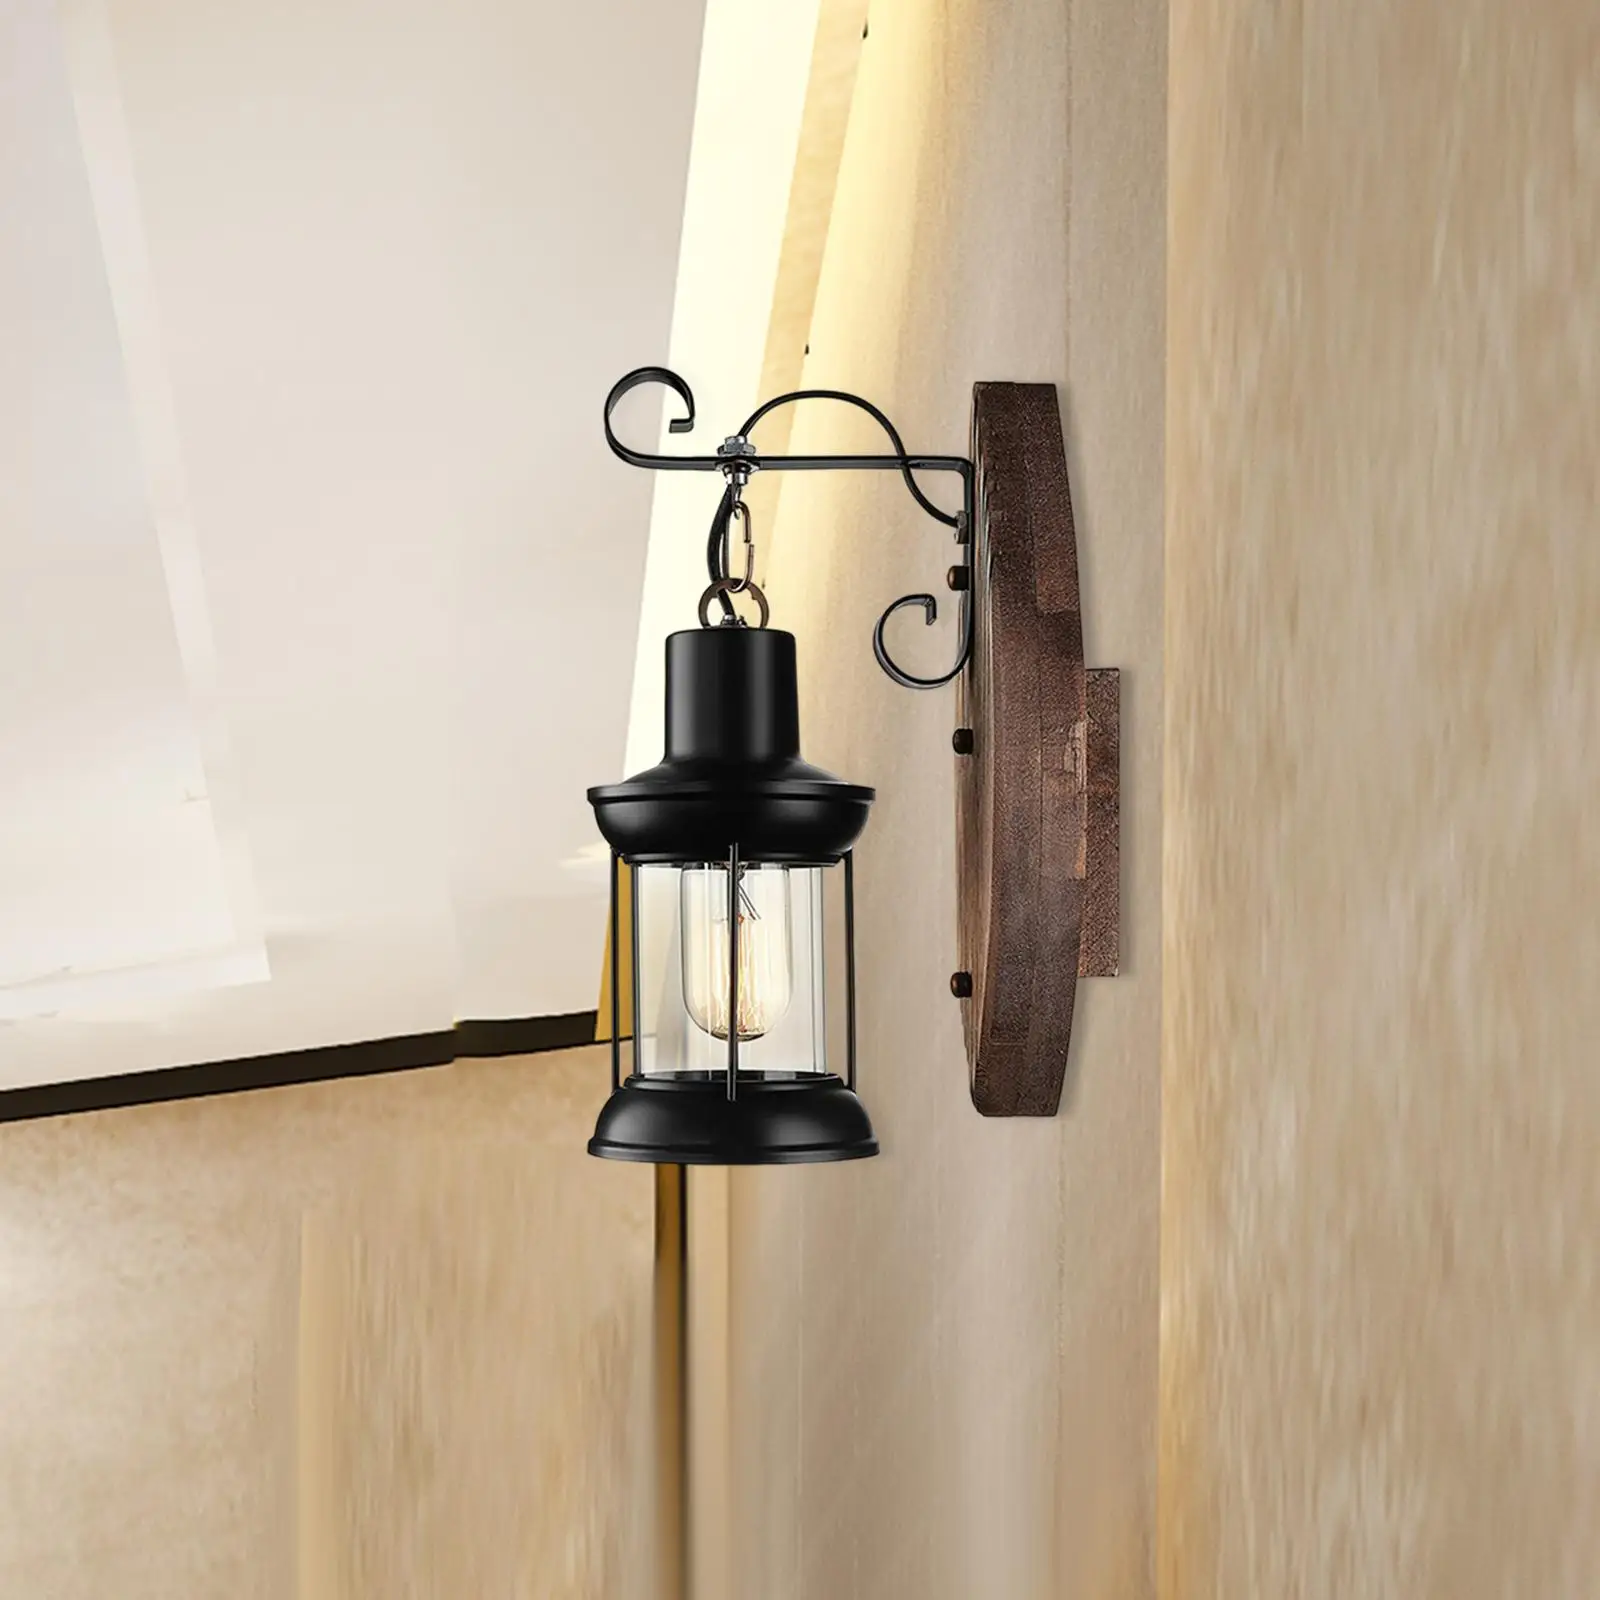 Vintage Style Wall Sconce Lamp Lighting Fixture Pendant Wall Sconce Creative E27 for Home Hotel Bathroom Entryway Corridor